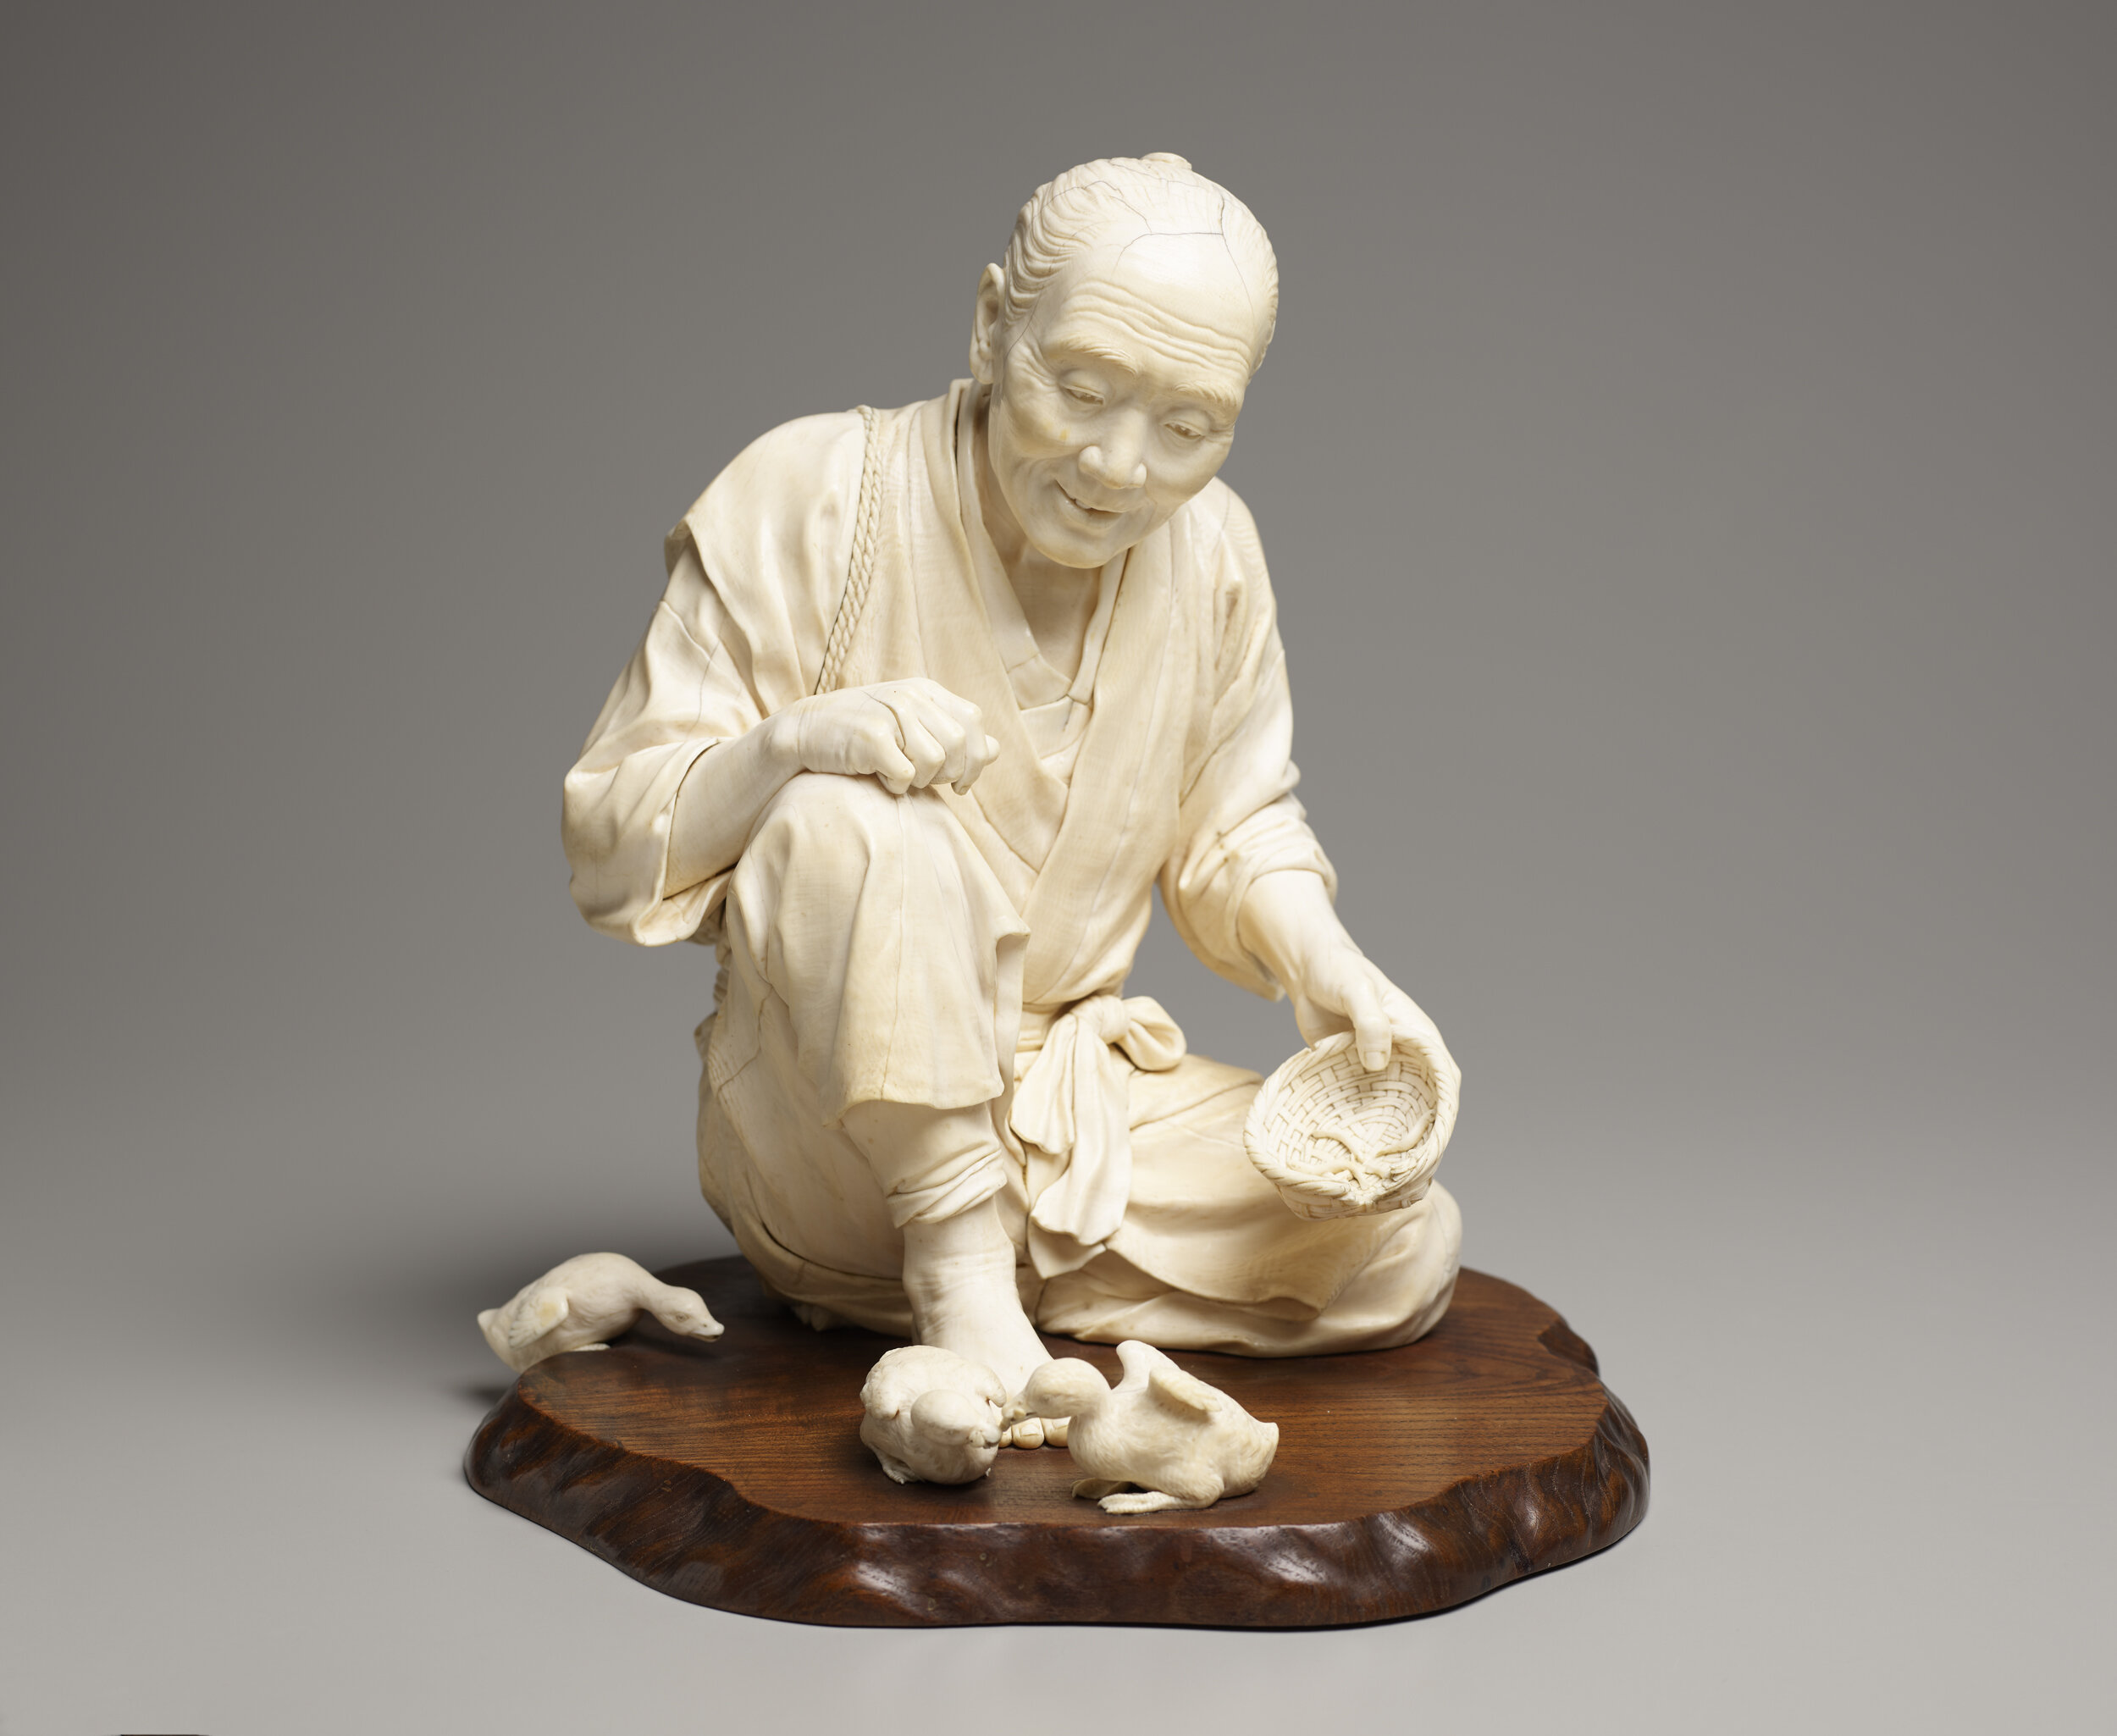  Hamada Masaaki (Japanese, 1898-1922), Old Man Feeding Ducks, late 19th century, ivory, 12 5/8 in x 12 5/8 in x 12 3/8 in, Gift of Rheba Turner from the Jerry Porsche Estate in memory of William D. WIlcox. Portland Art Museum, Portland, Oregon, 87.24